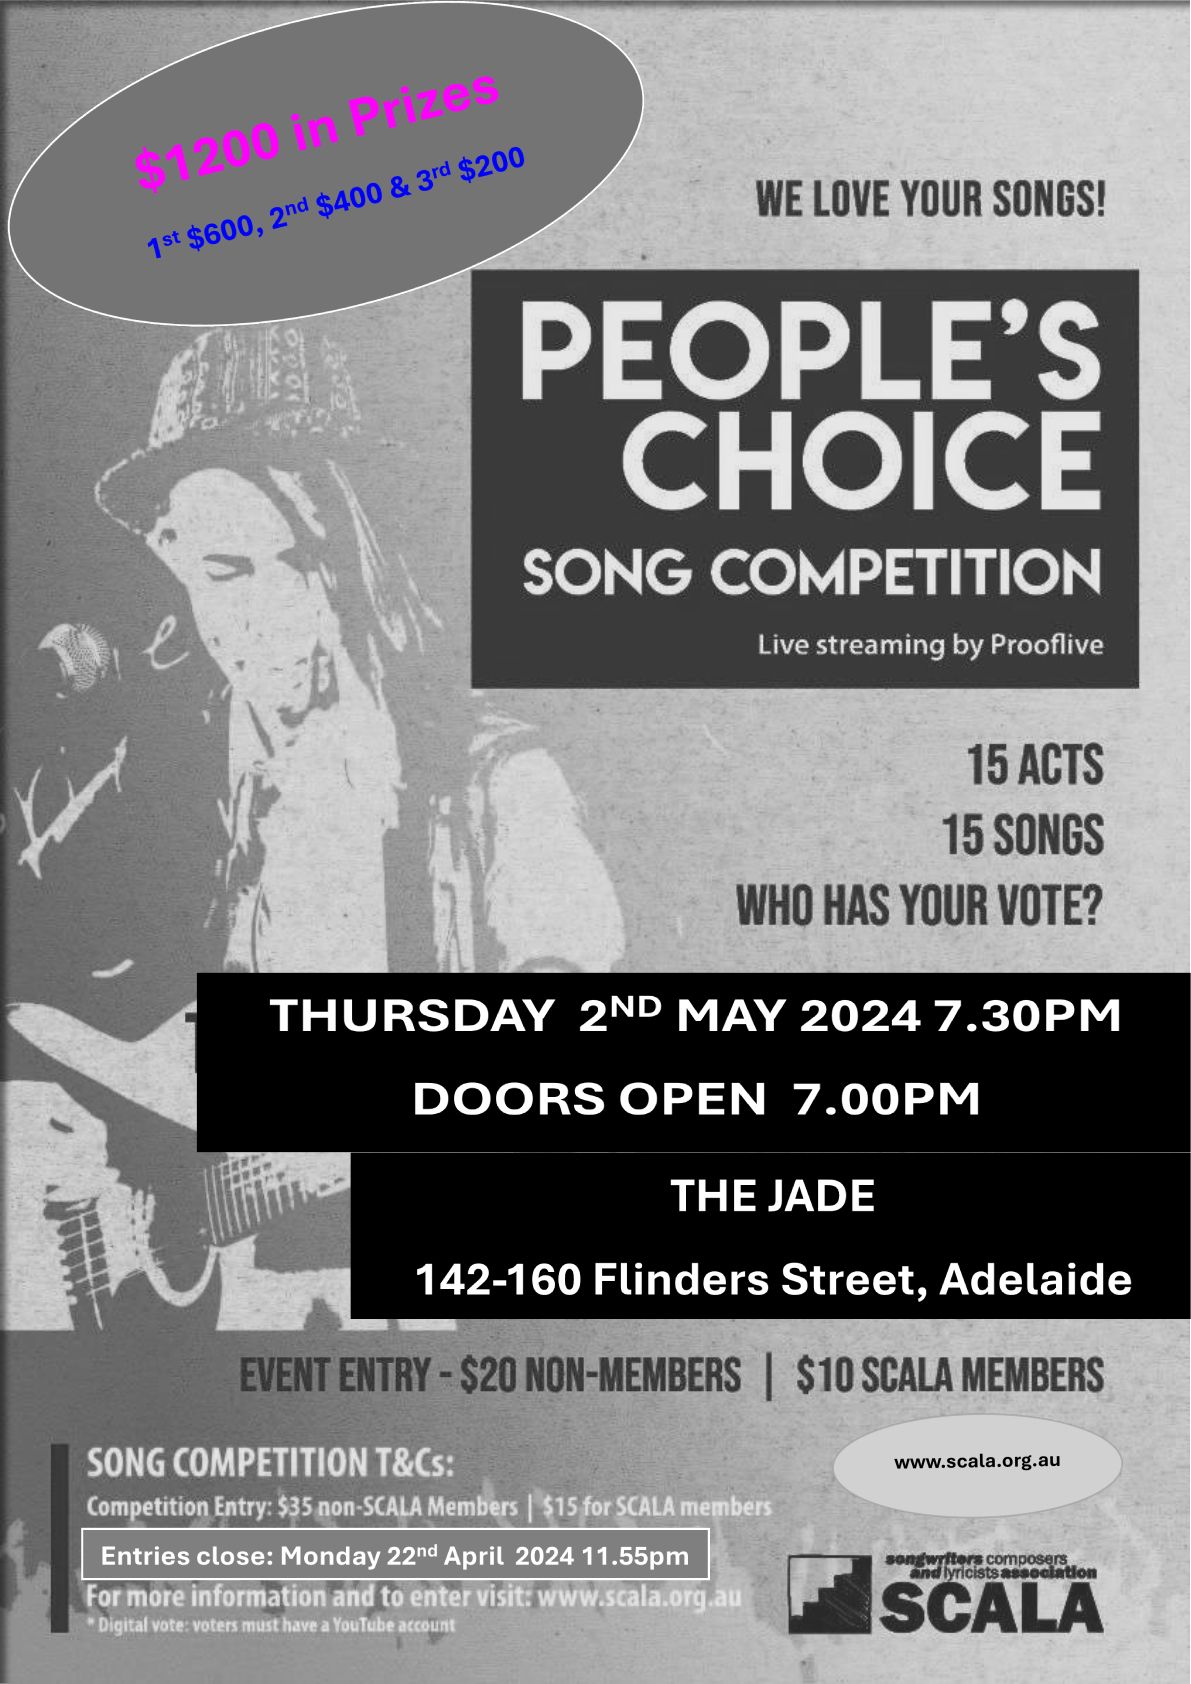 SCALA People's Choice Song Competition